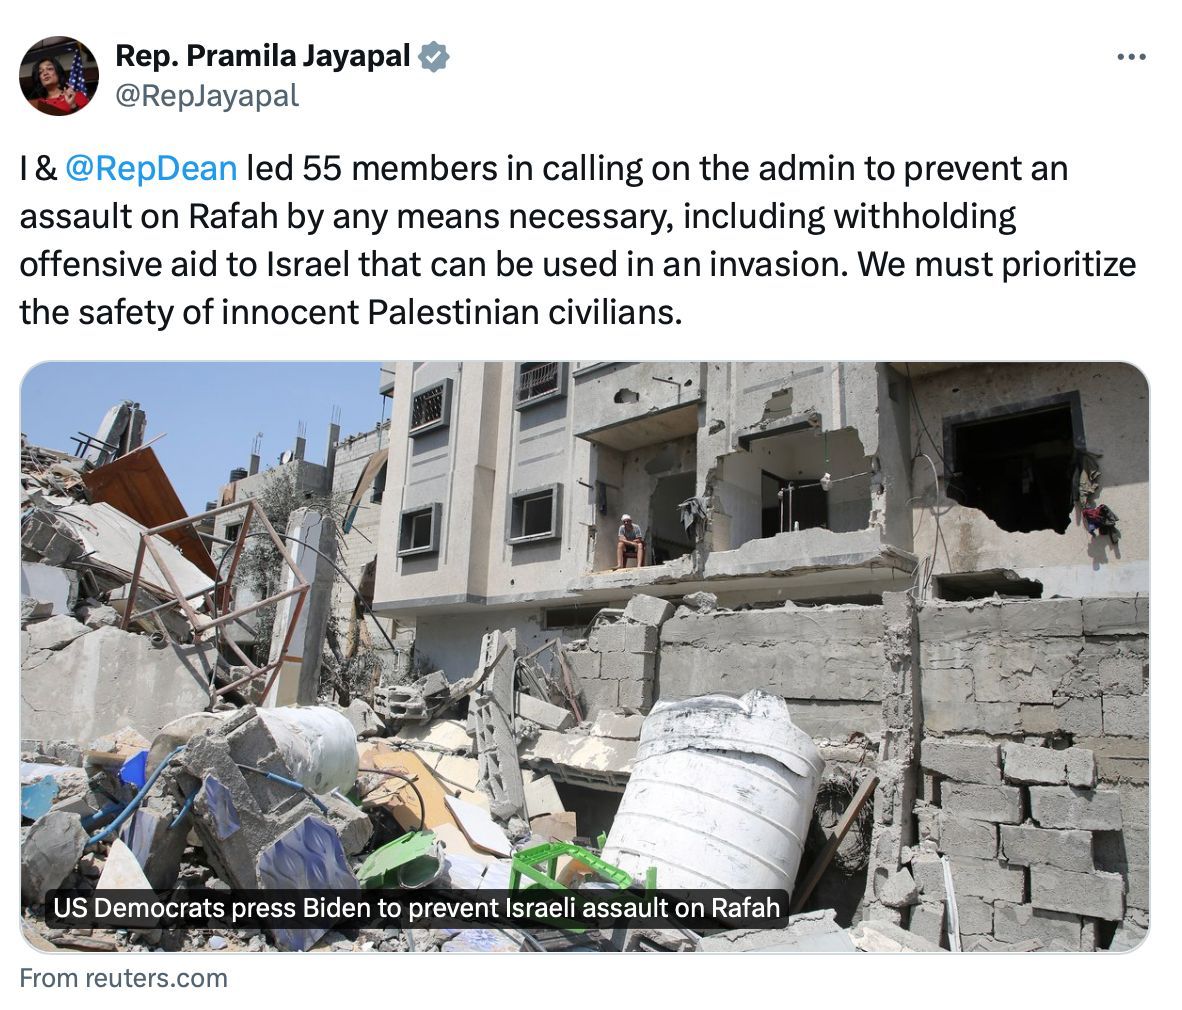 Thank you to @RepJayapal, @RepPressley, @RepMcGovern, and 52 other representatives for calling on the Biden administration to prevent the imminent attack by Israel on Rafah. It's time for President Biden to exert the power and influence he has to act and protect Palestinian lives